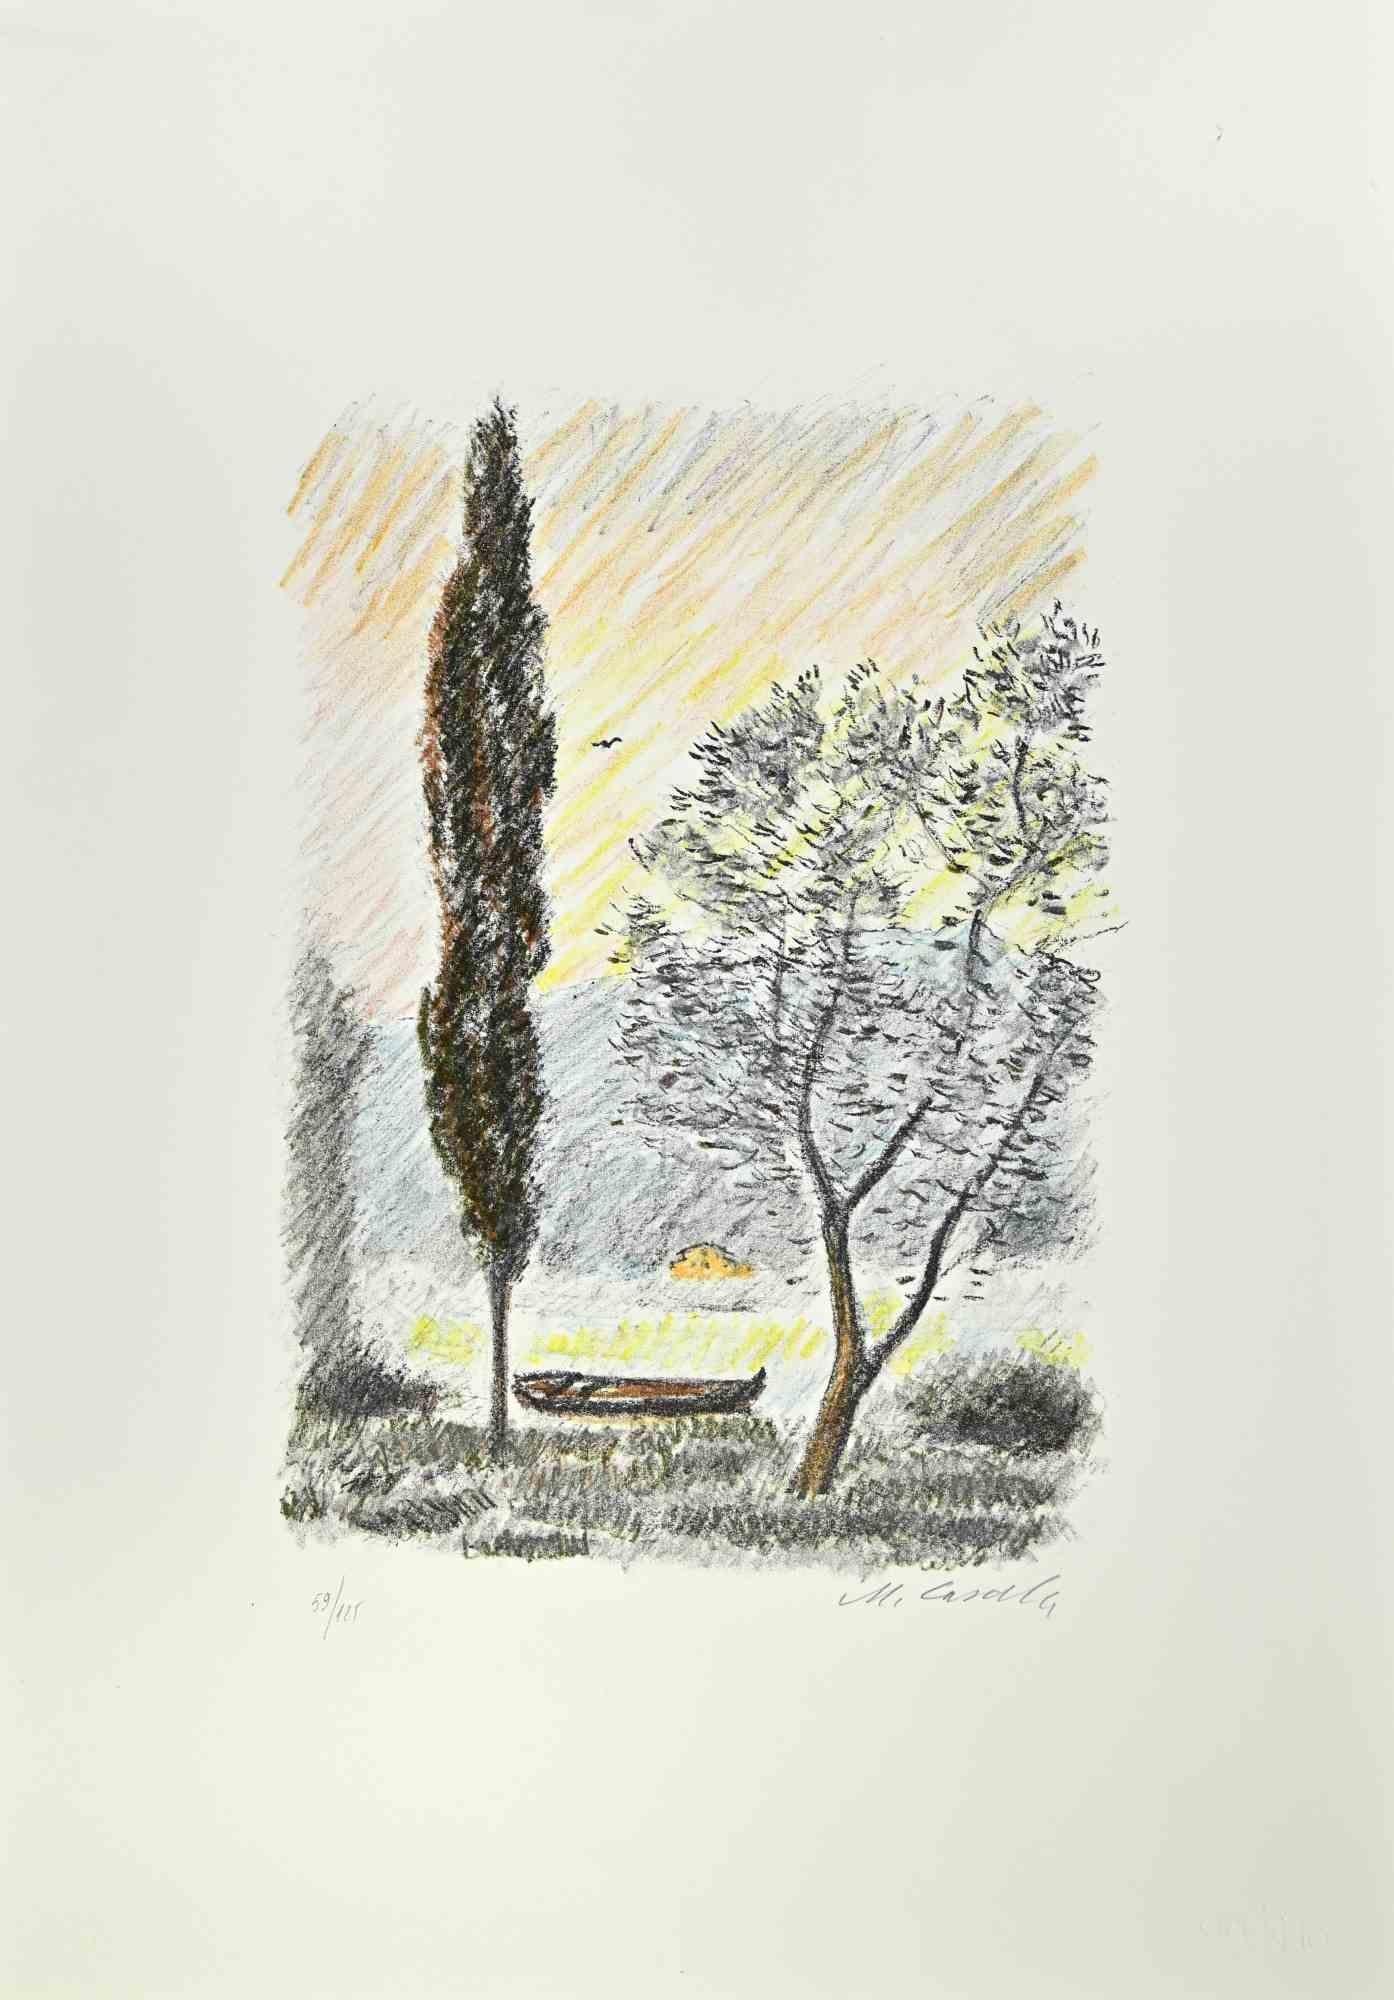 Pescara's Pine-wood is an artwork realized in 1979, by the Italian Artist Michele Cascella.

Colored lithograph on paper of the Portfolio "Landscape", 1979, with six original lithograph and the poems of Franco Simongini titled "Twenty Landscapes